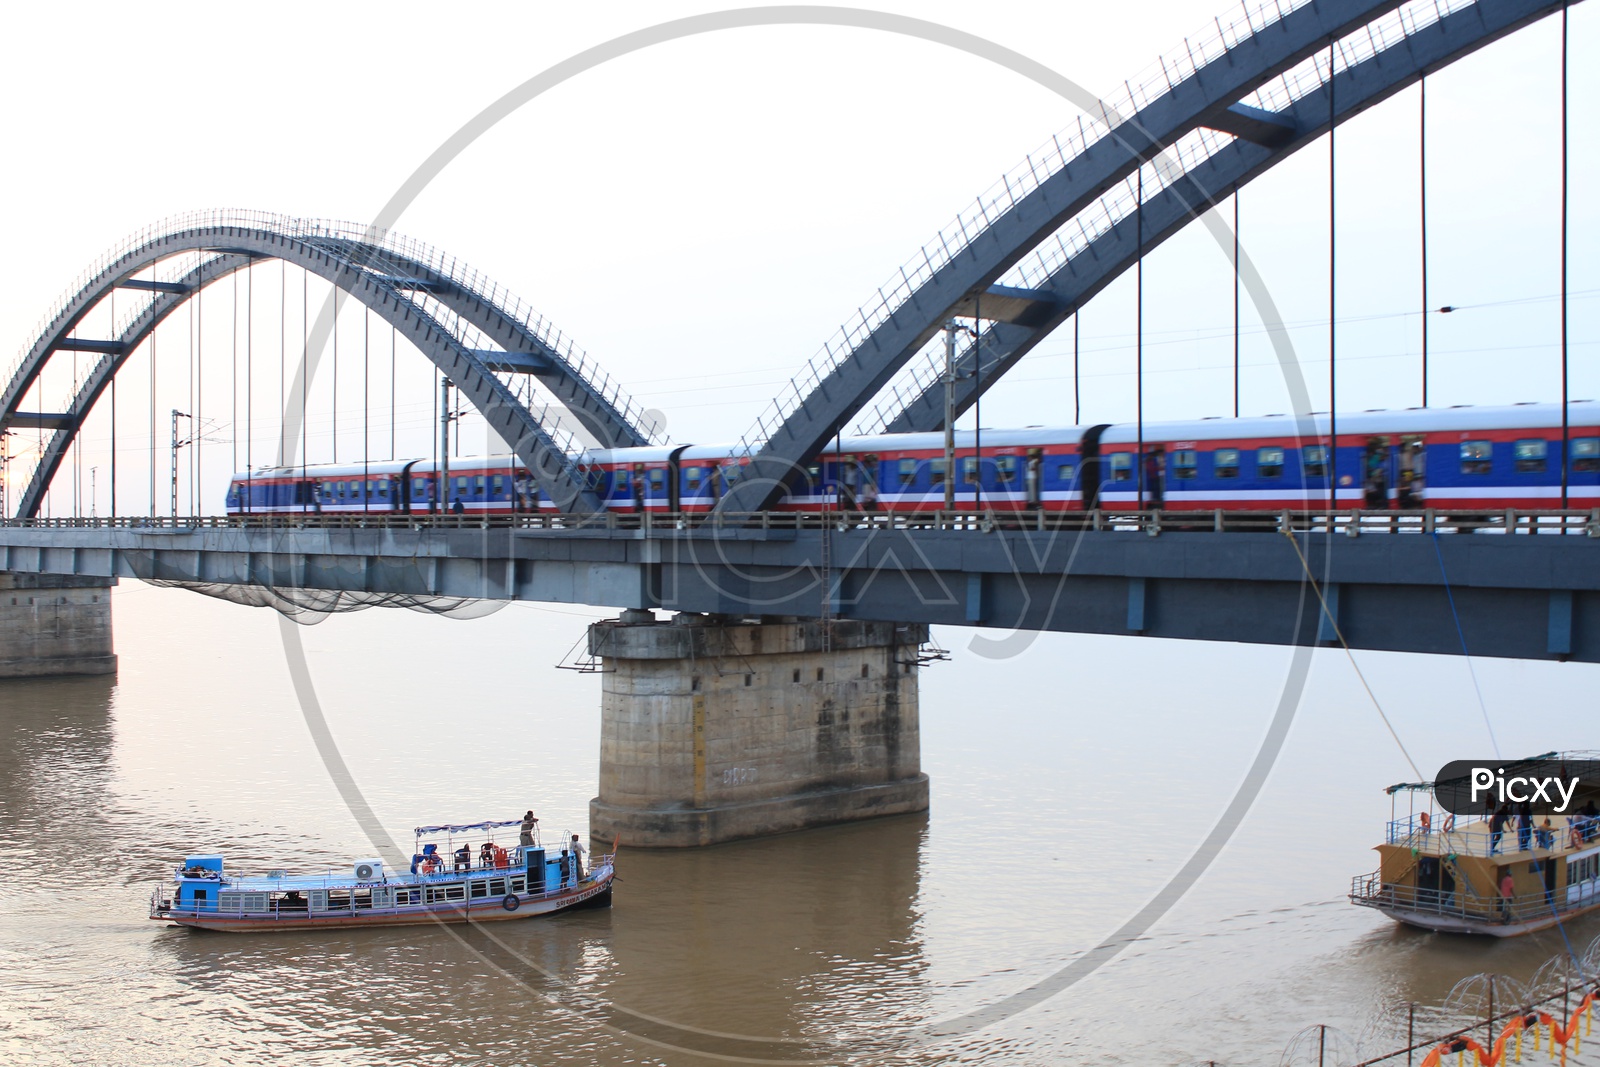 Rajahmundry bridge and Boats In the River